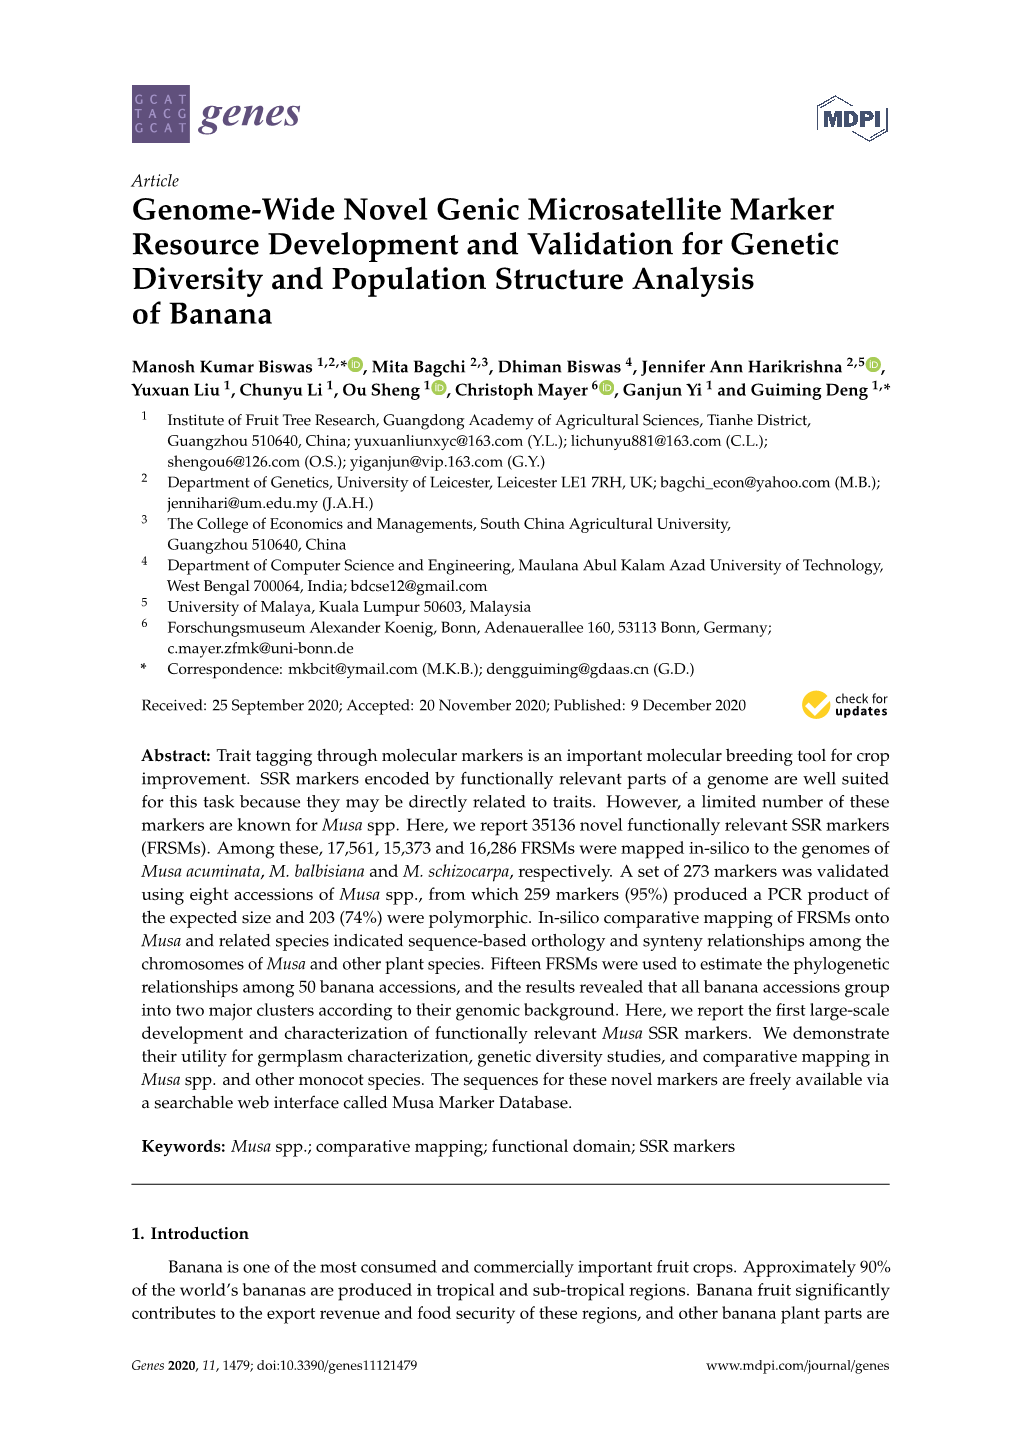 Genome-Wide Novel Genic Microsatellite Marker Resource Development and Validation for Genetic Diversity and Population Structure Analysis of Banana